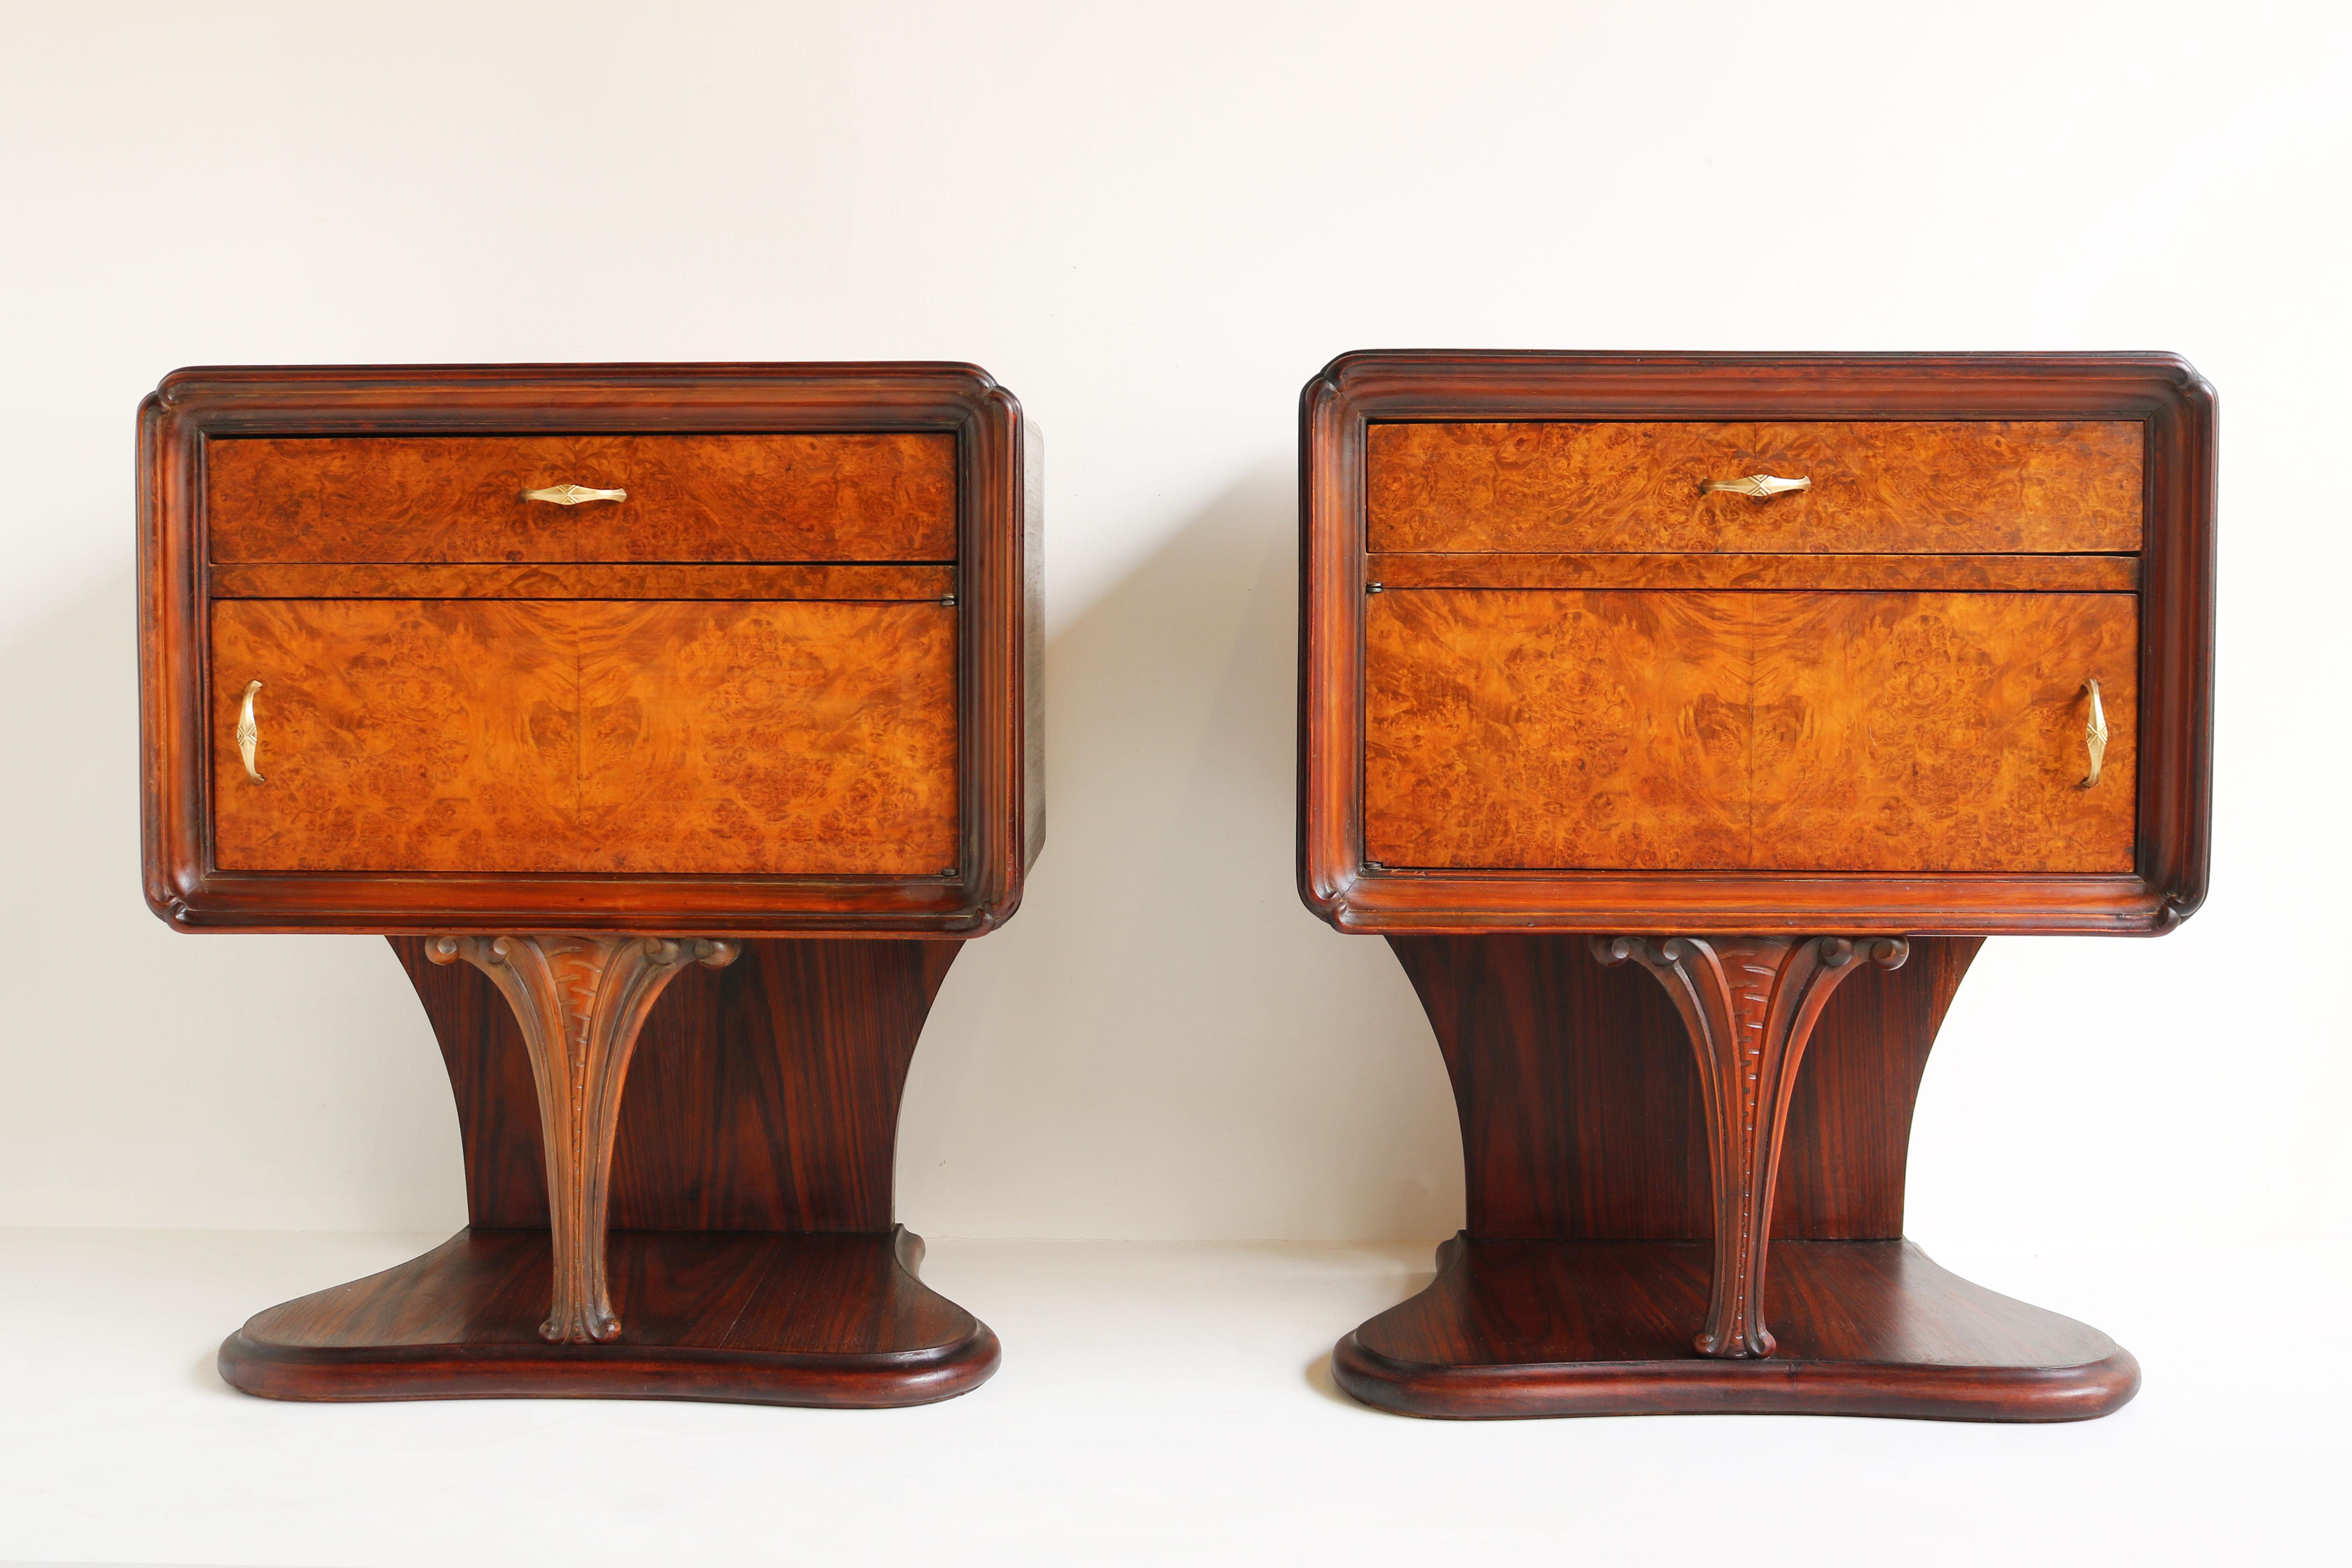 Hand-Crafted Pair of Italian Art Deco Night Stands / Bedside Tables in Rosewood & Walnut Burl